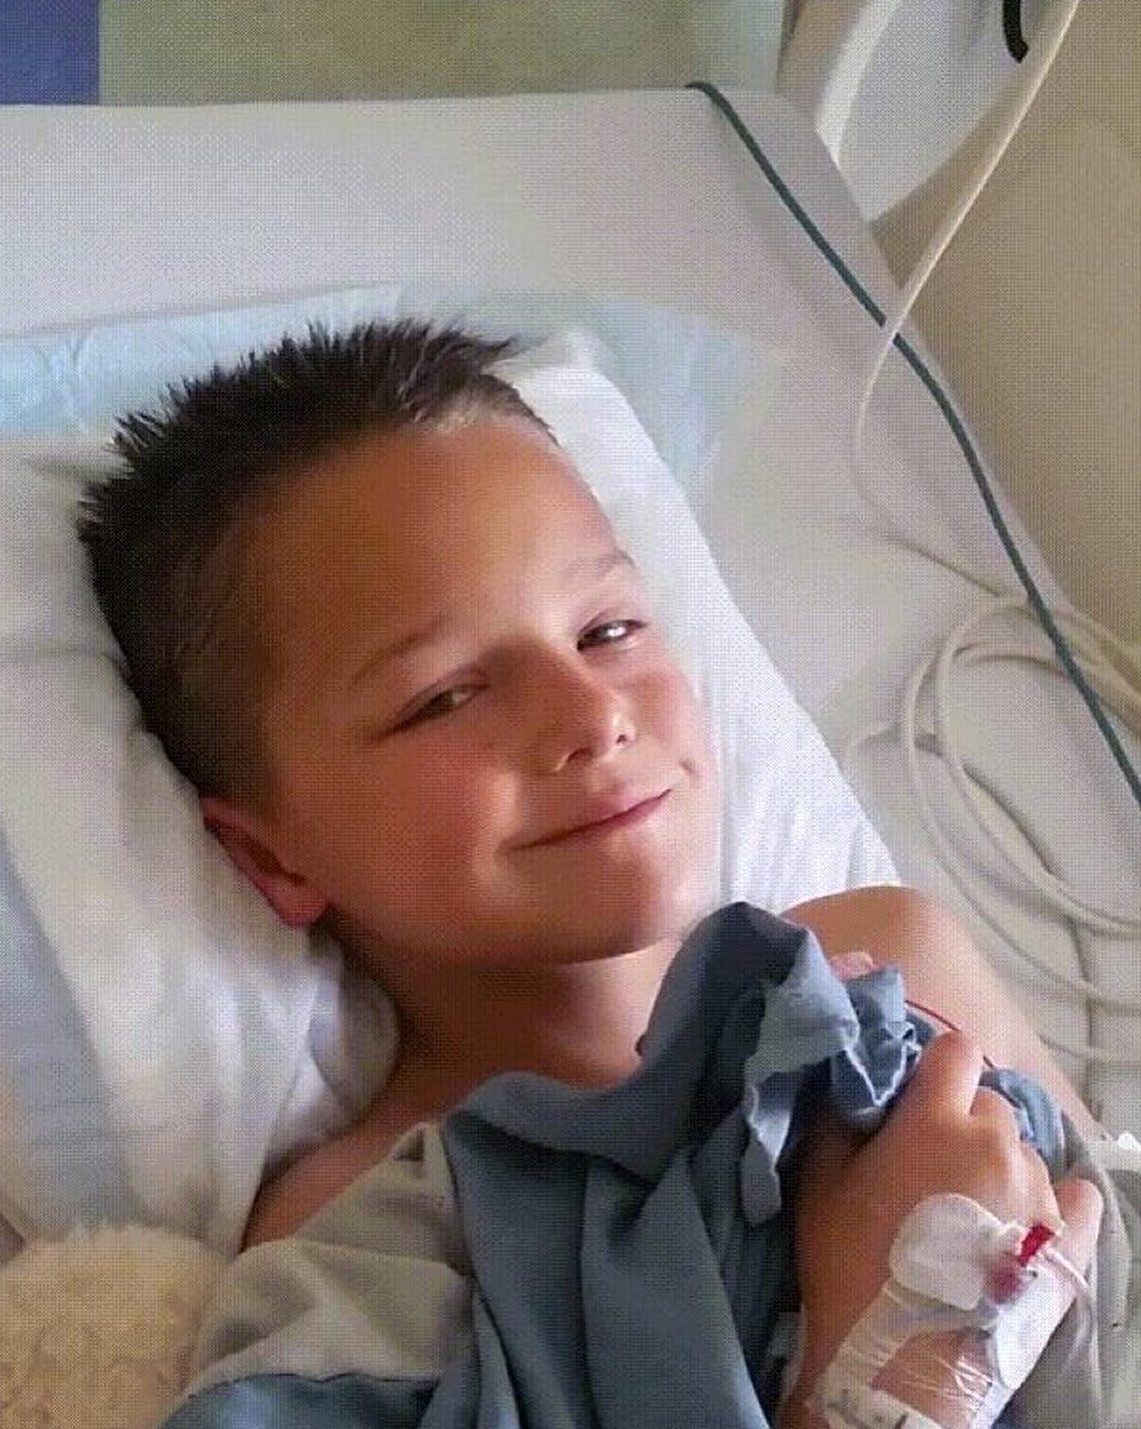 A young boy sits in a hospital bed wearing a hospital gown, hooked up to IVs, and smirking at the camera.